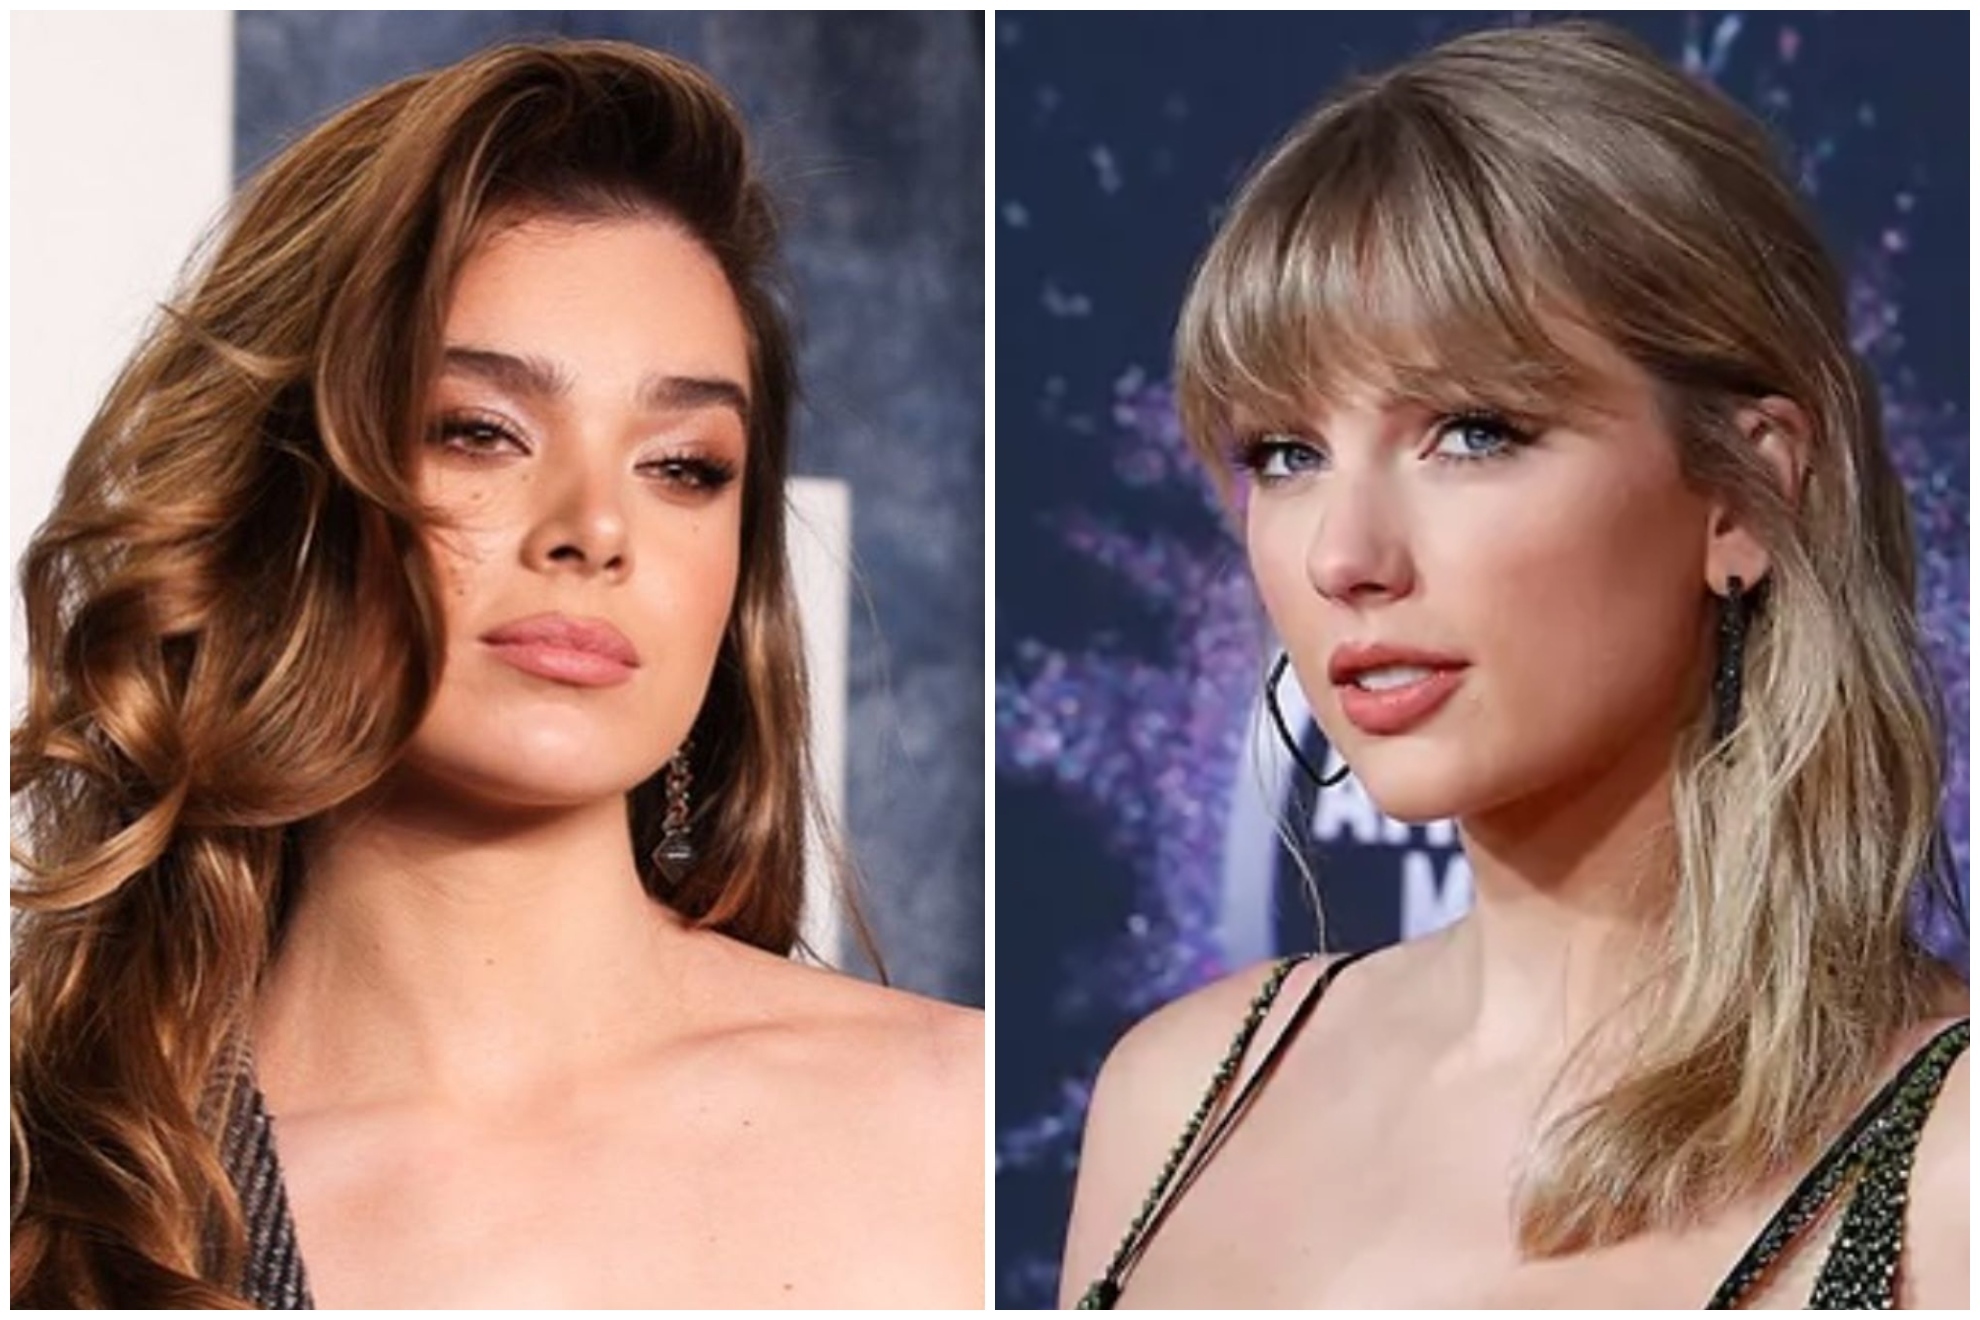 Hailee Steinfeld and Taylor Swift